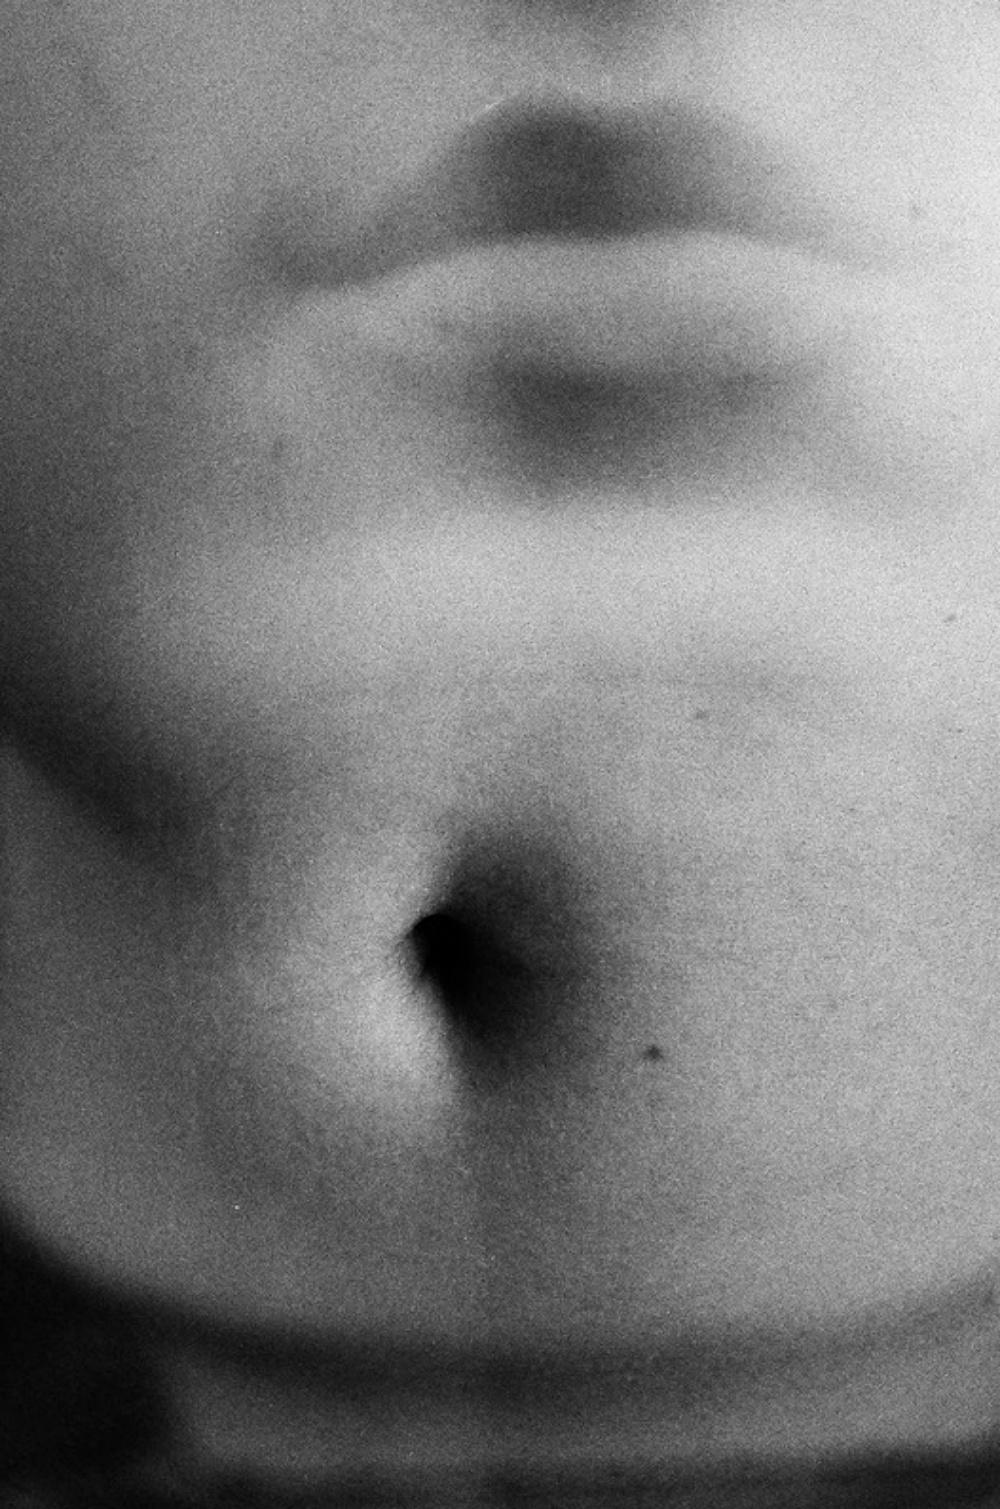 LINA SCHEYNIUS (*1981, Sweden)
Untitled (Touching)
2021
Fibre-based silver gelatin print
Sheet 90 x 60 cm (35 3/8 x 23 5/8 in.) 
Edition of 3, plus 2 AP; Ed. no. 1/3
Print only

Touchingly casual, Lina Scheynius captures scenes from her daily life,